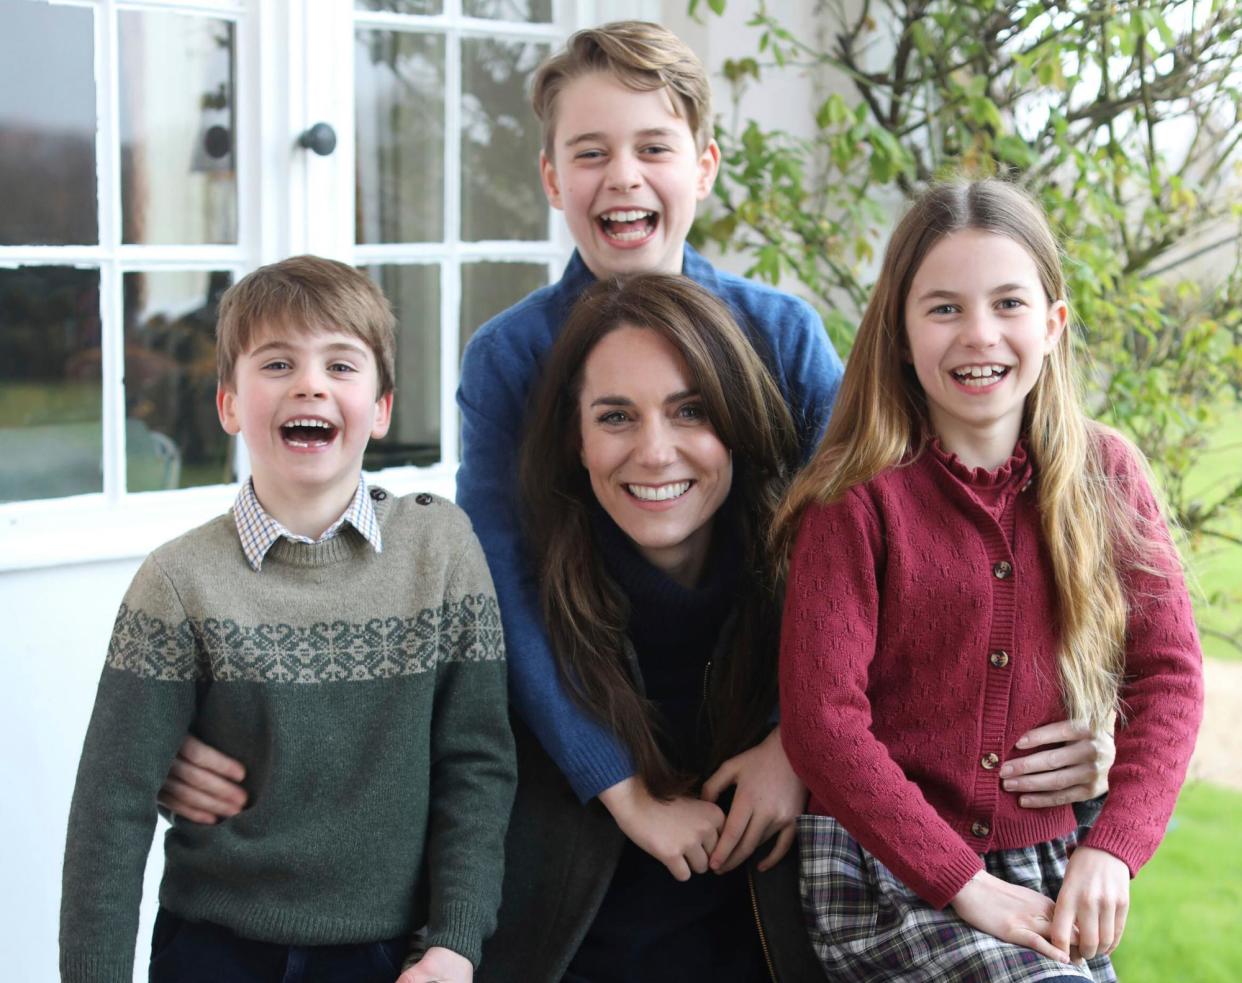 <span>The Princess of Wales had attempted to adjust this family photo amid frenzied social media speculation about her wellbeing.</span><span>Photograph: Prince of Wales/AP</span>